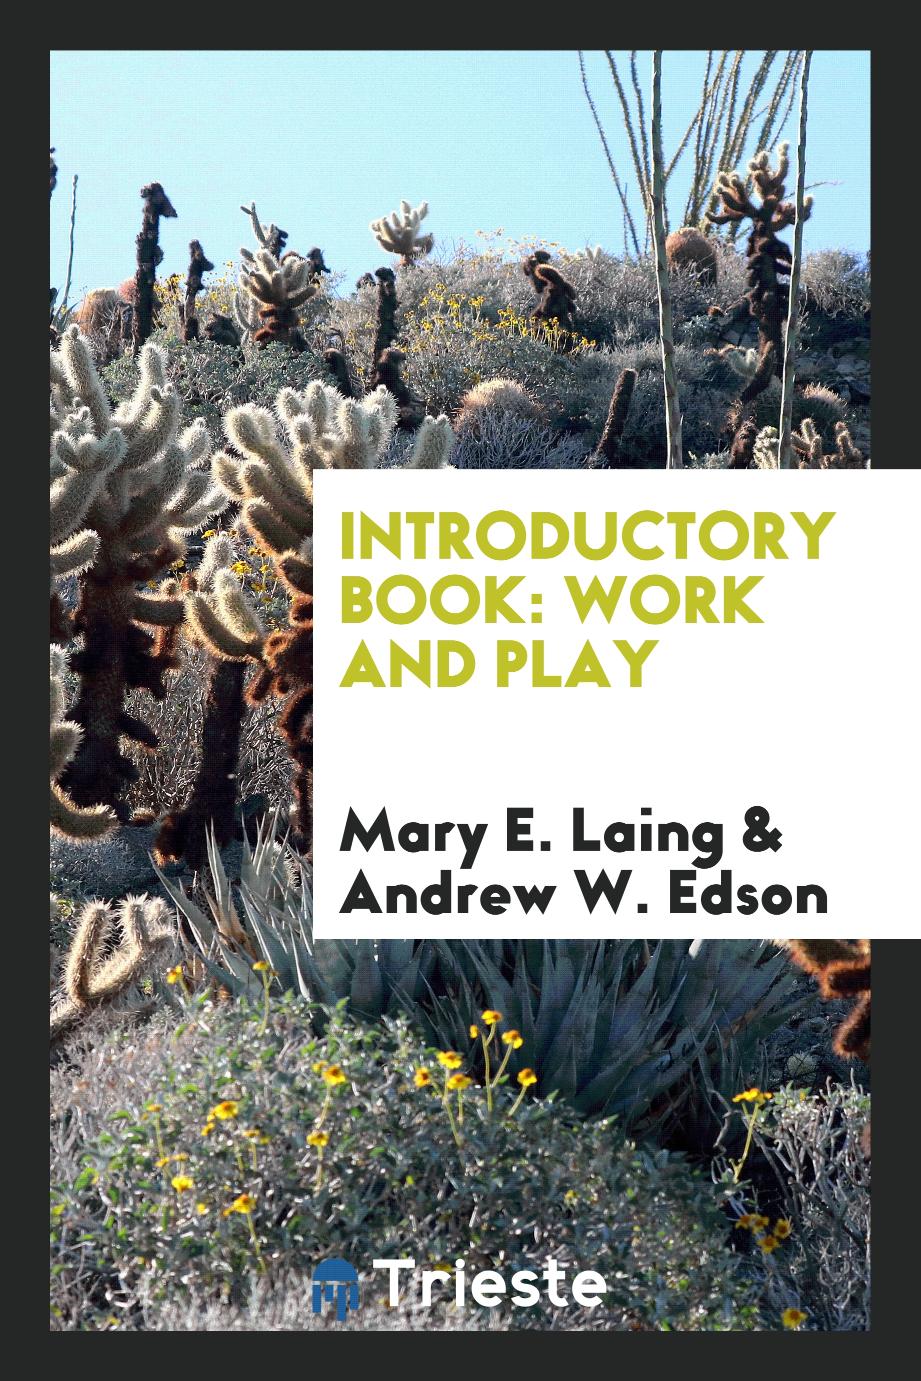 Introductory Book: Work and Play